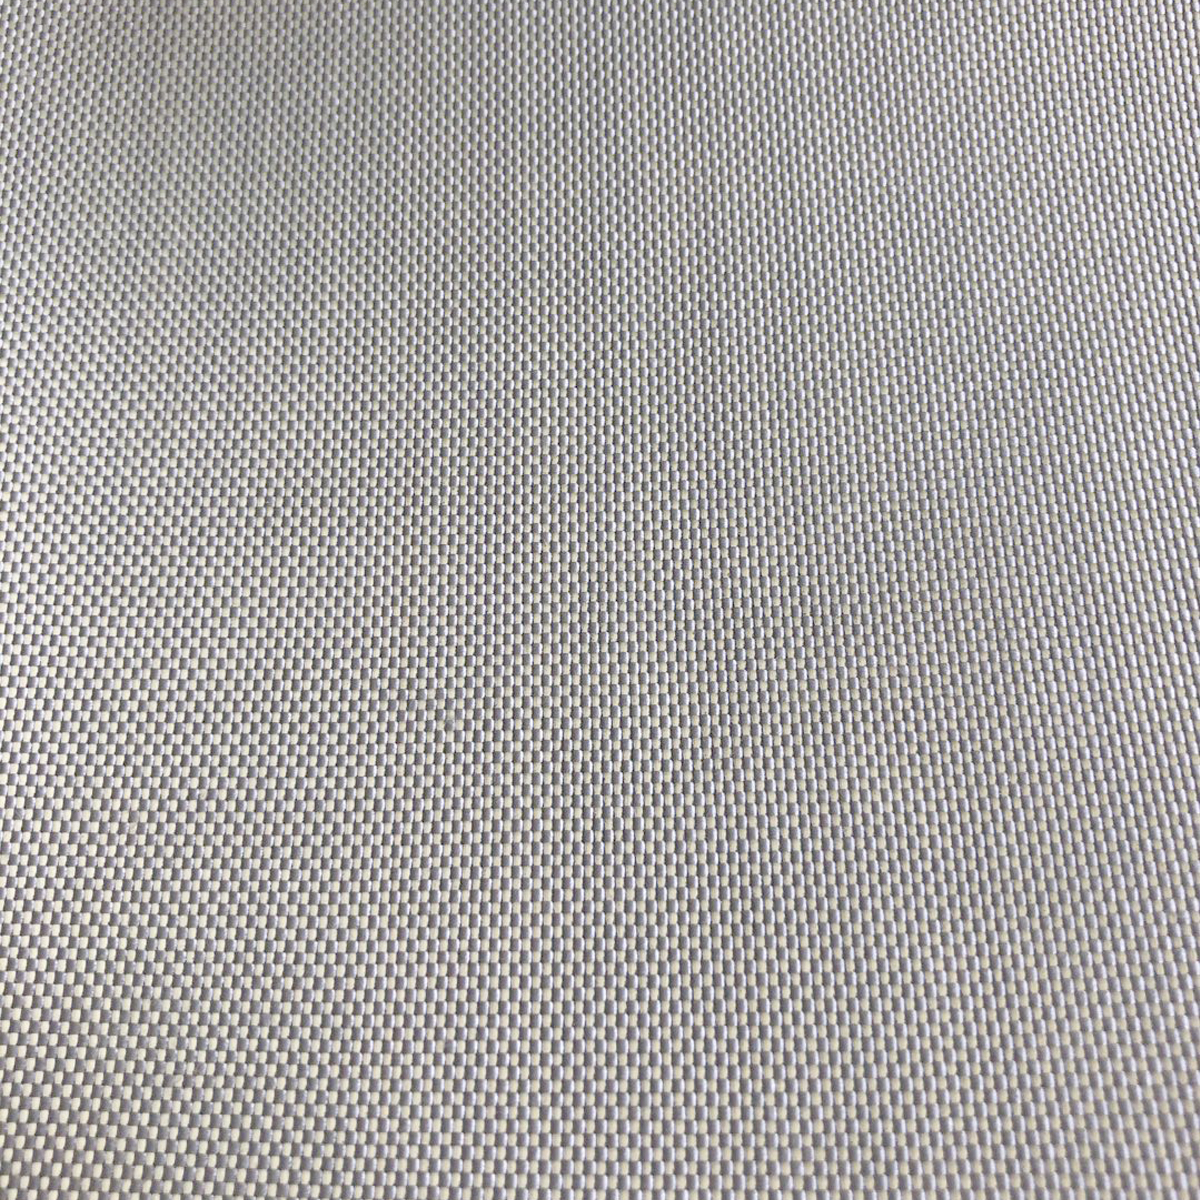 High Strength Aramid Yarn Stab Proof Fabric from China manufacturer - JEELY